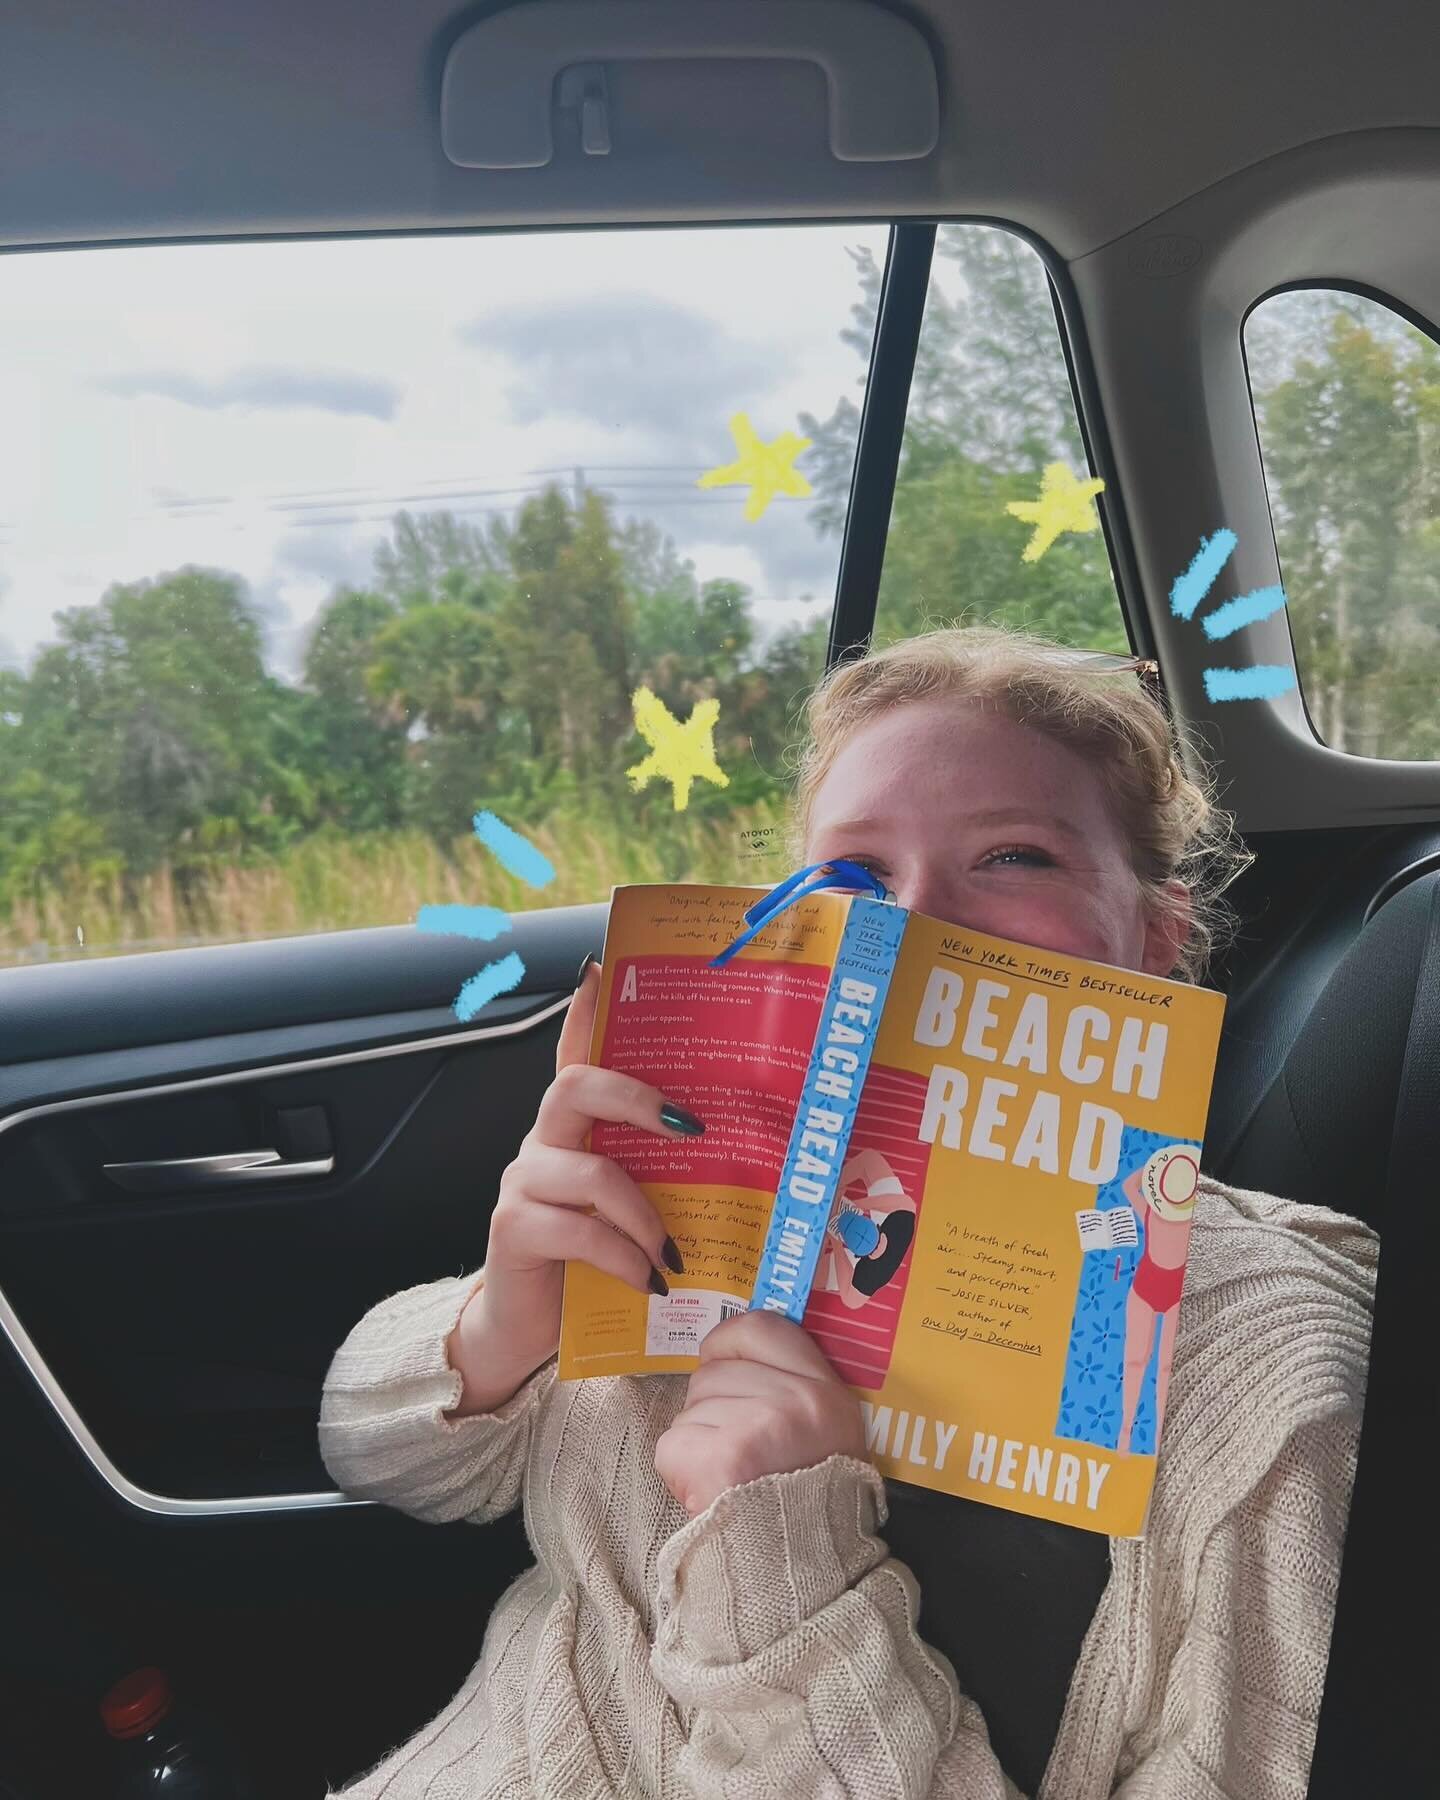 found these pictures from my vacation I took to Florida this past January!! ☀️

Reading Emily Henry on the vacation is such a vibe 🌊 and Beach Read is such a great read!!

❔What are you currently reading?

#beachread #bookstagram #booksbooksbooks #b